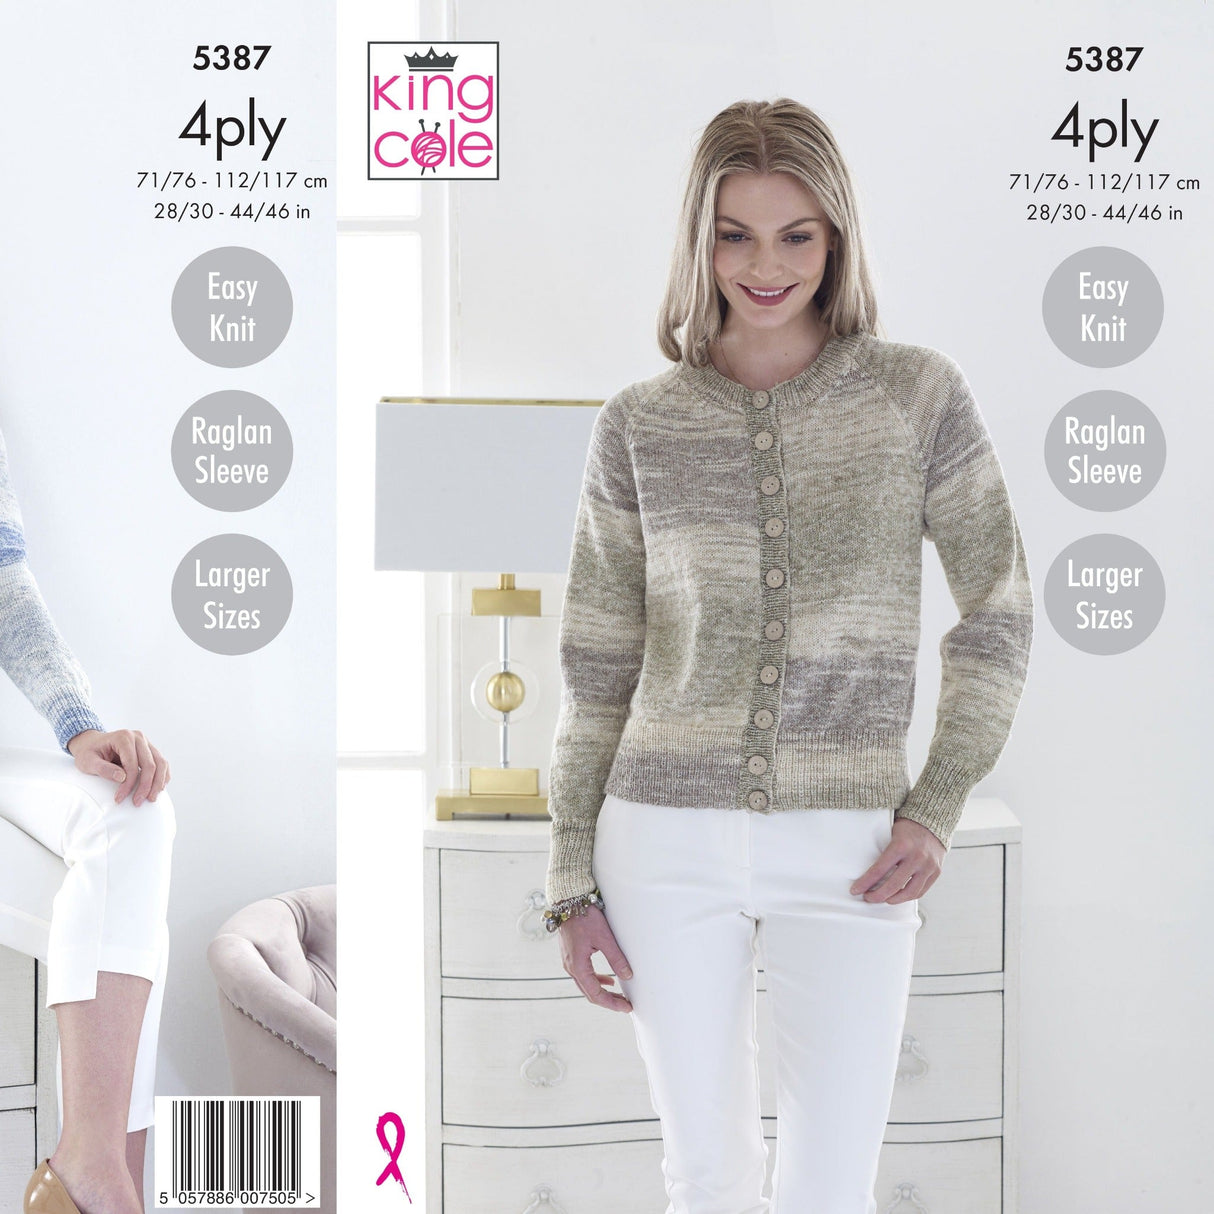 King Cole Patterns King Cole Ladies Easy Knit 4 Ply Knitting Pattern 5387